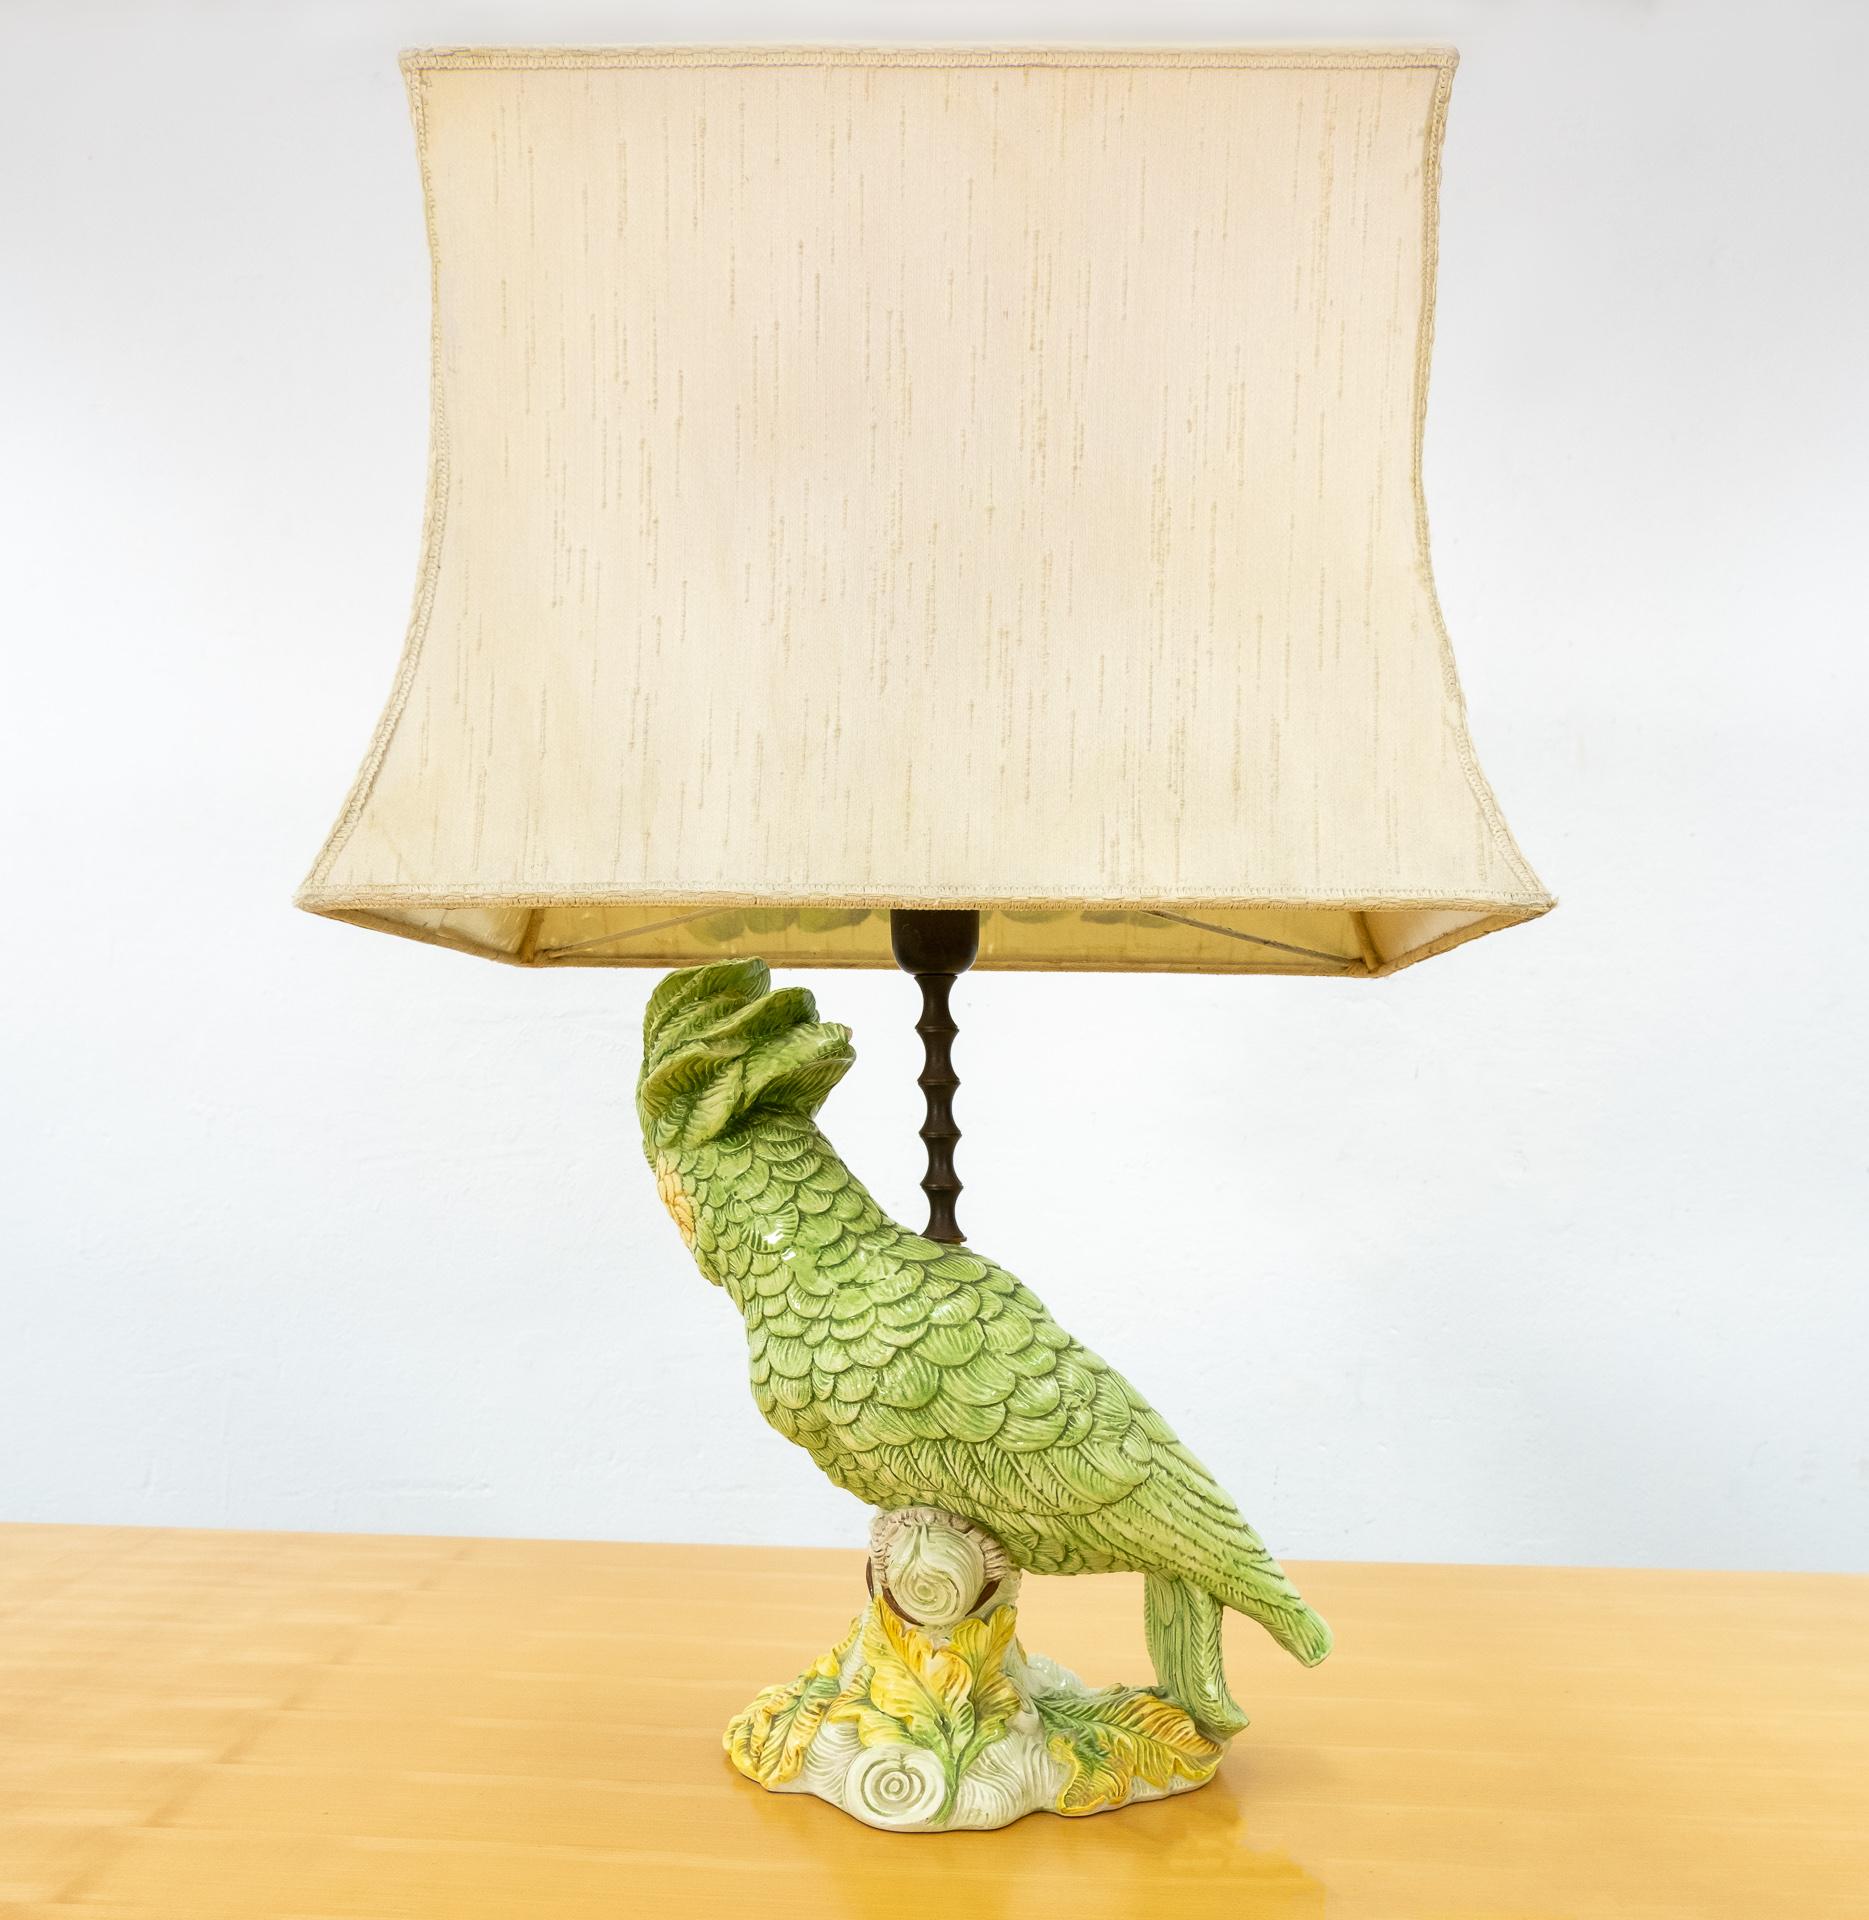 Ceramic Parrot Table Lamp, Italy, 1960s